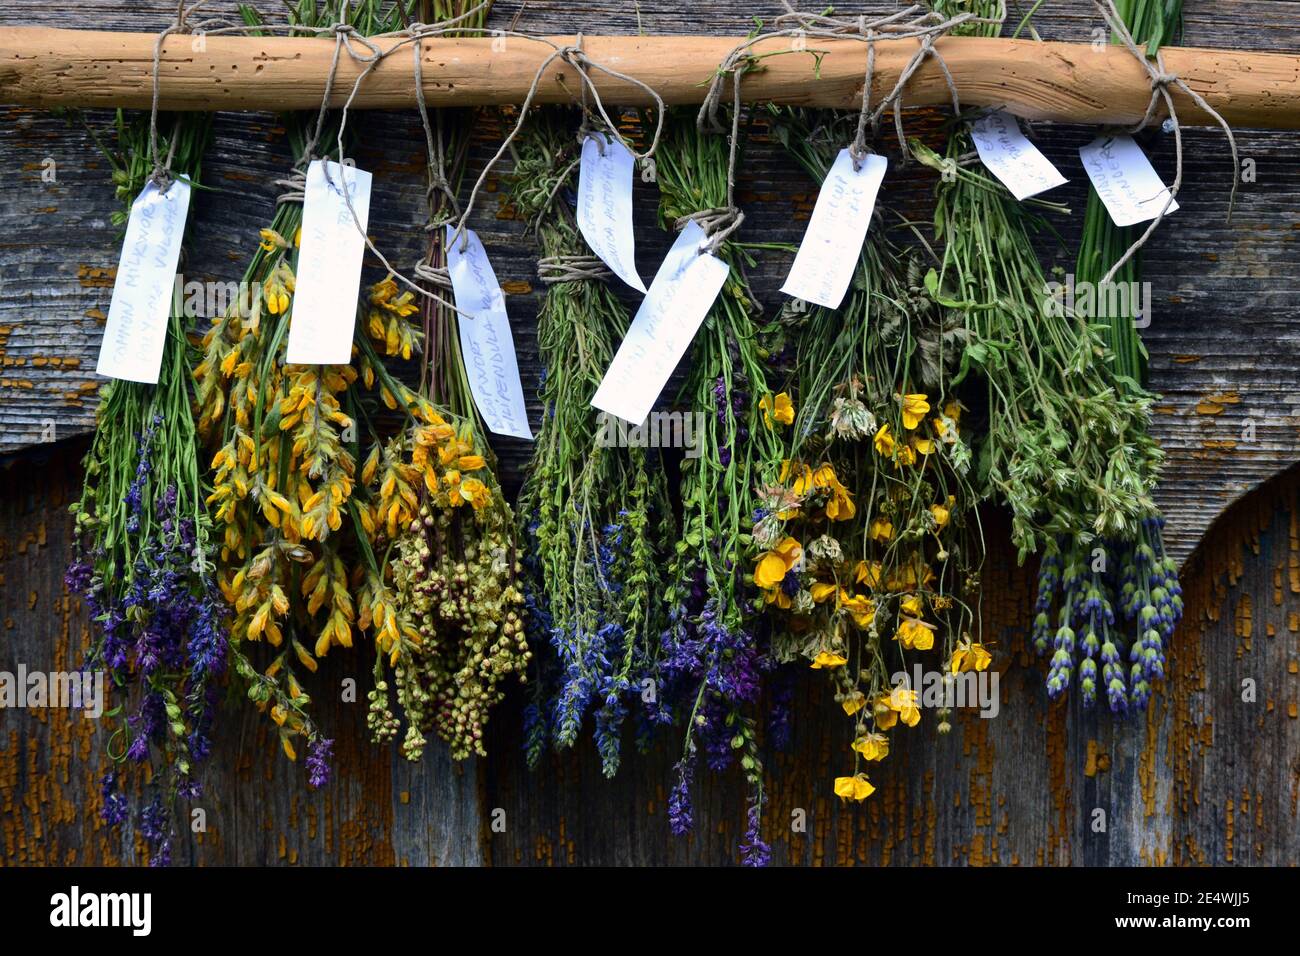 Bunches of dry herbal plants hanging on old wooden wall Stock Photo